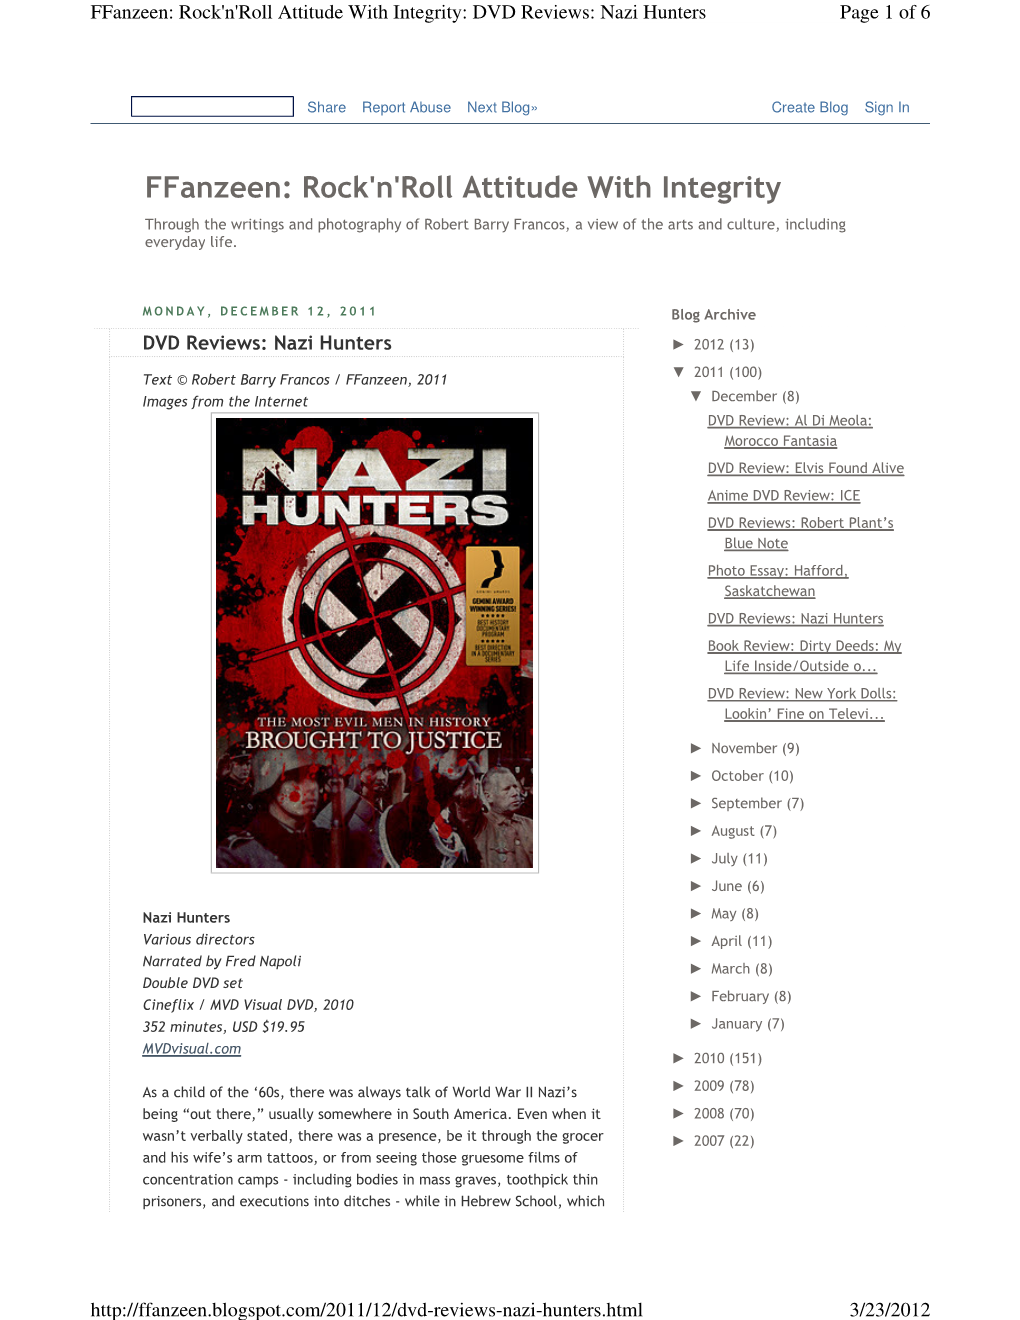 Ffanzeen: Rock'n'roll Attitude with Integrity: DVD Reviews: Nazi Hunters Page 1 of 6